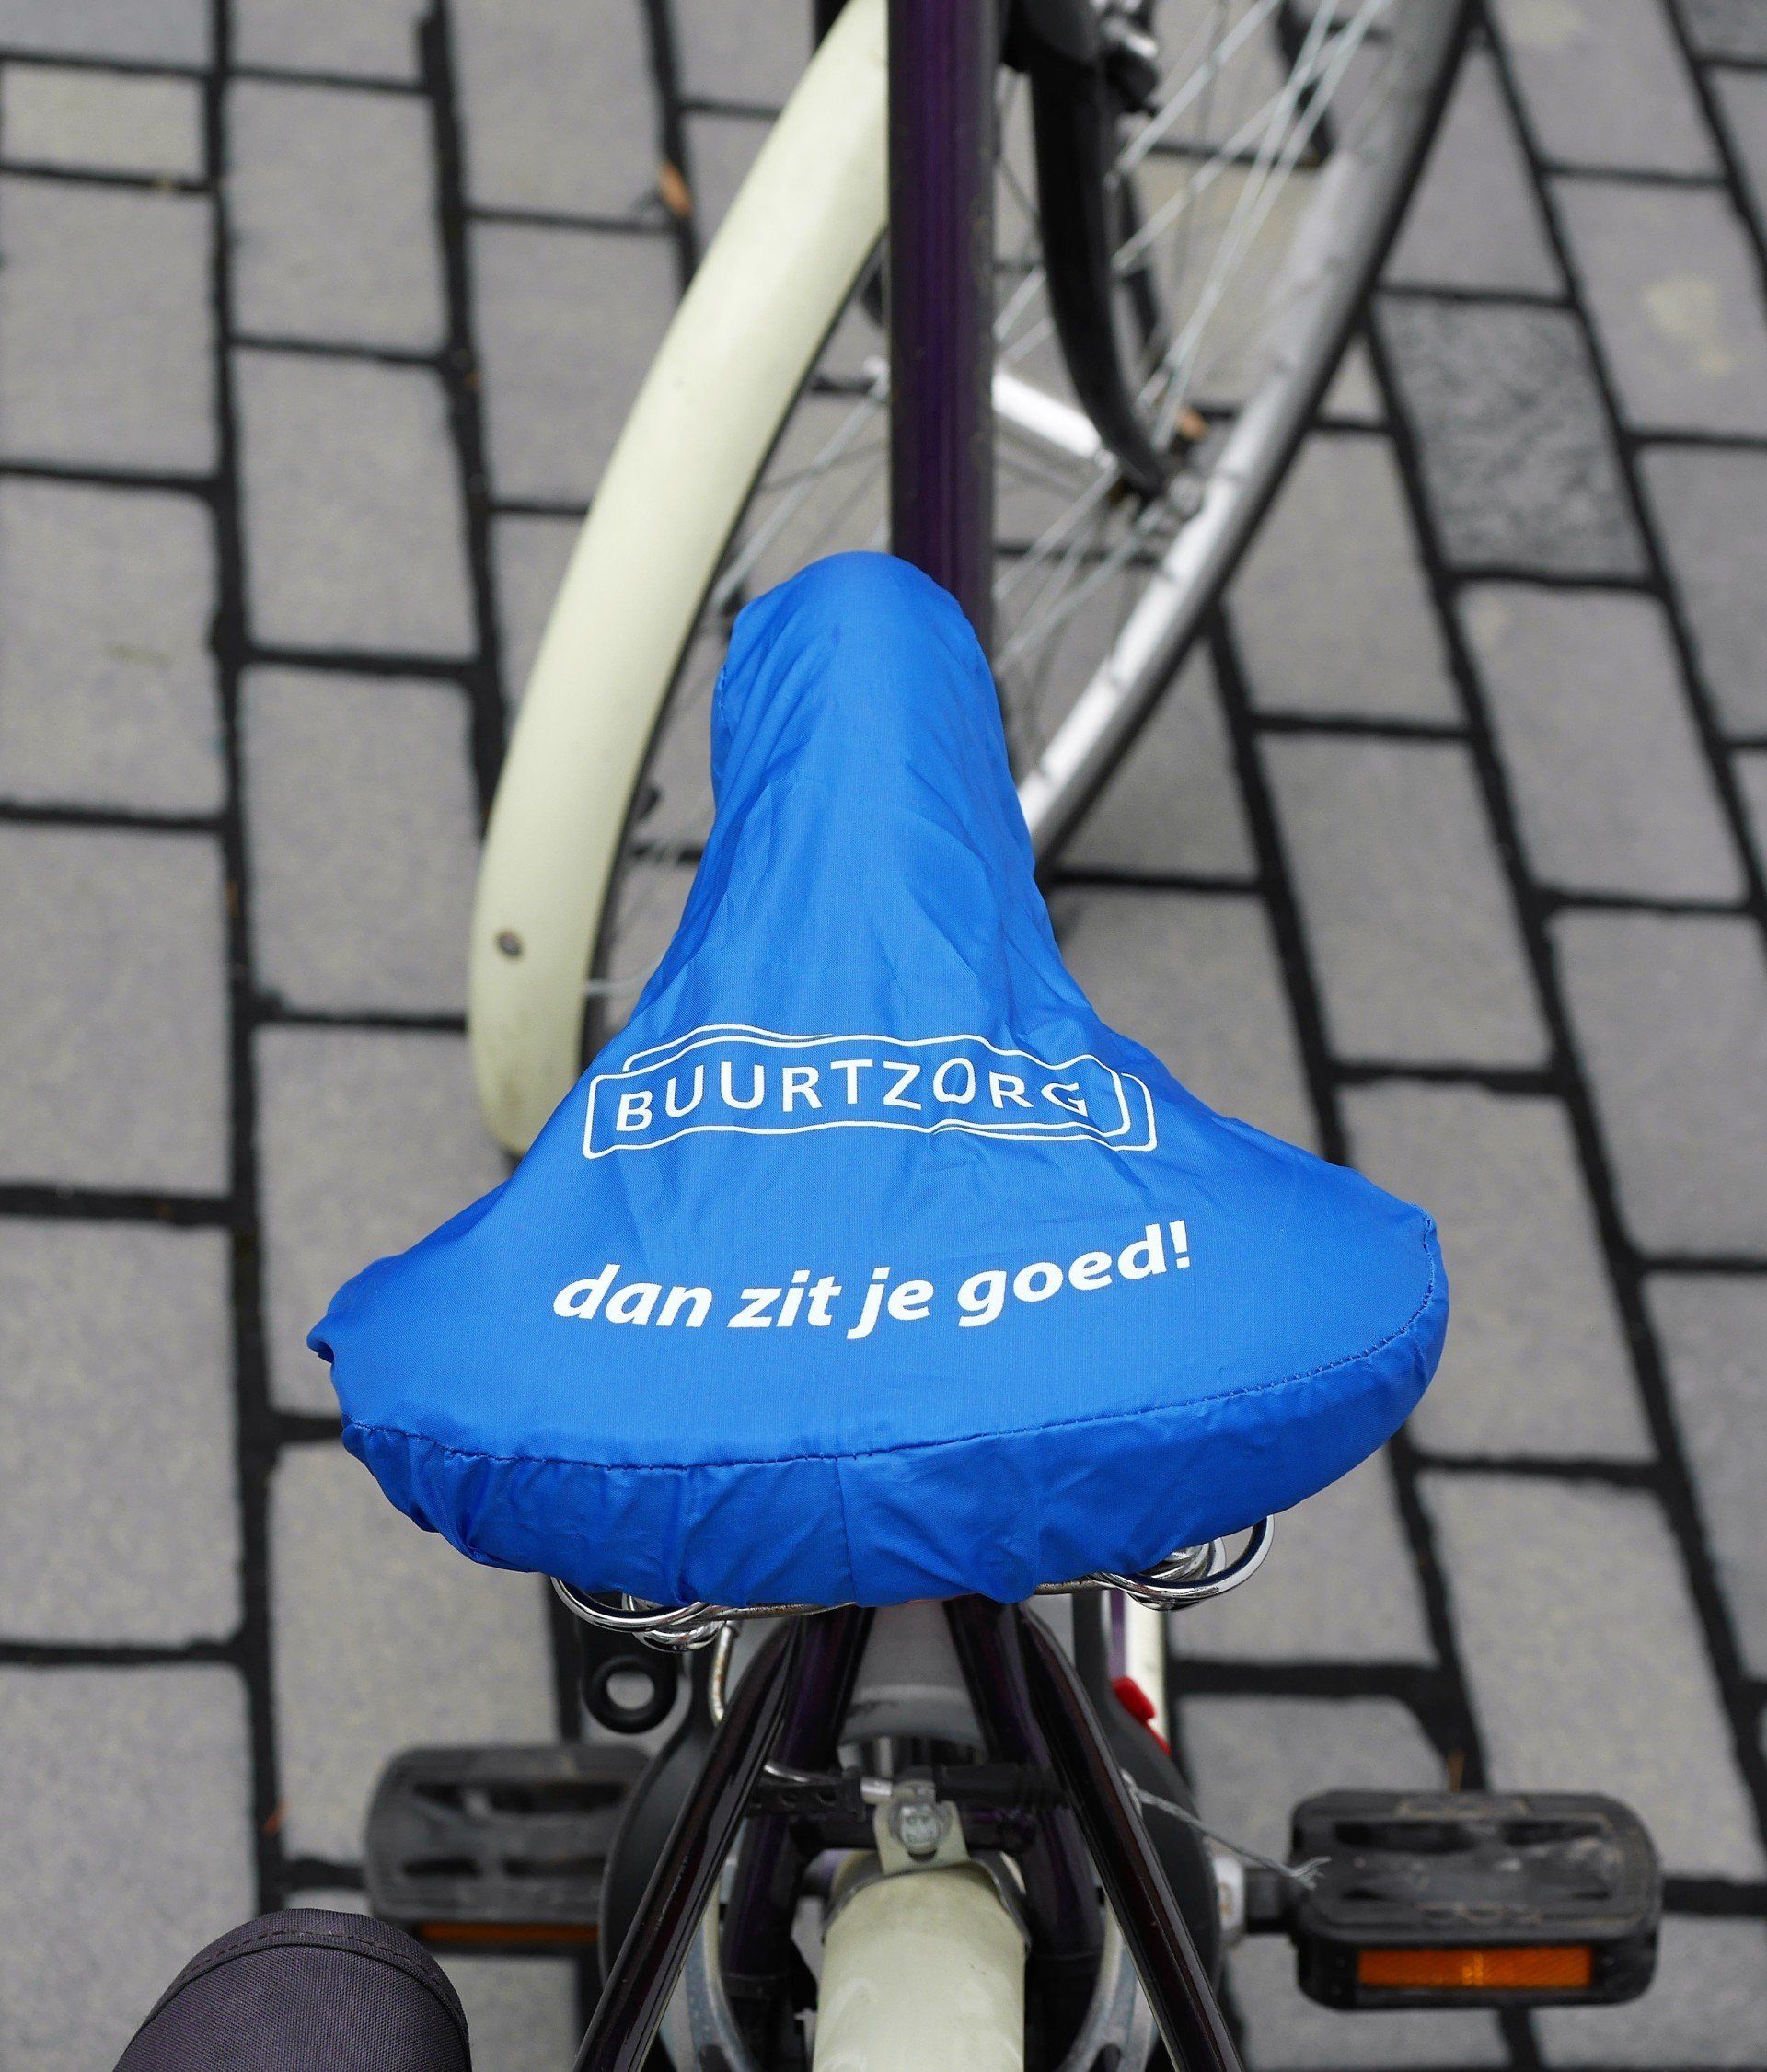 Bicycle seat with cover reading Buurtzorg - Dan zit je goed